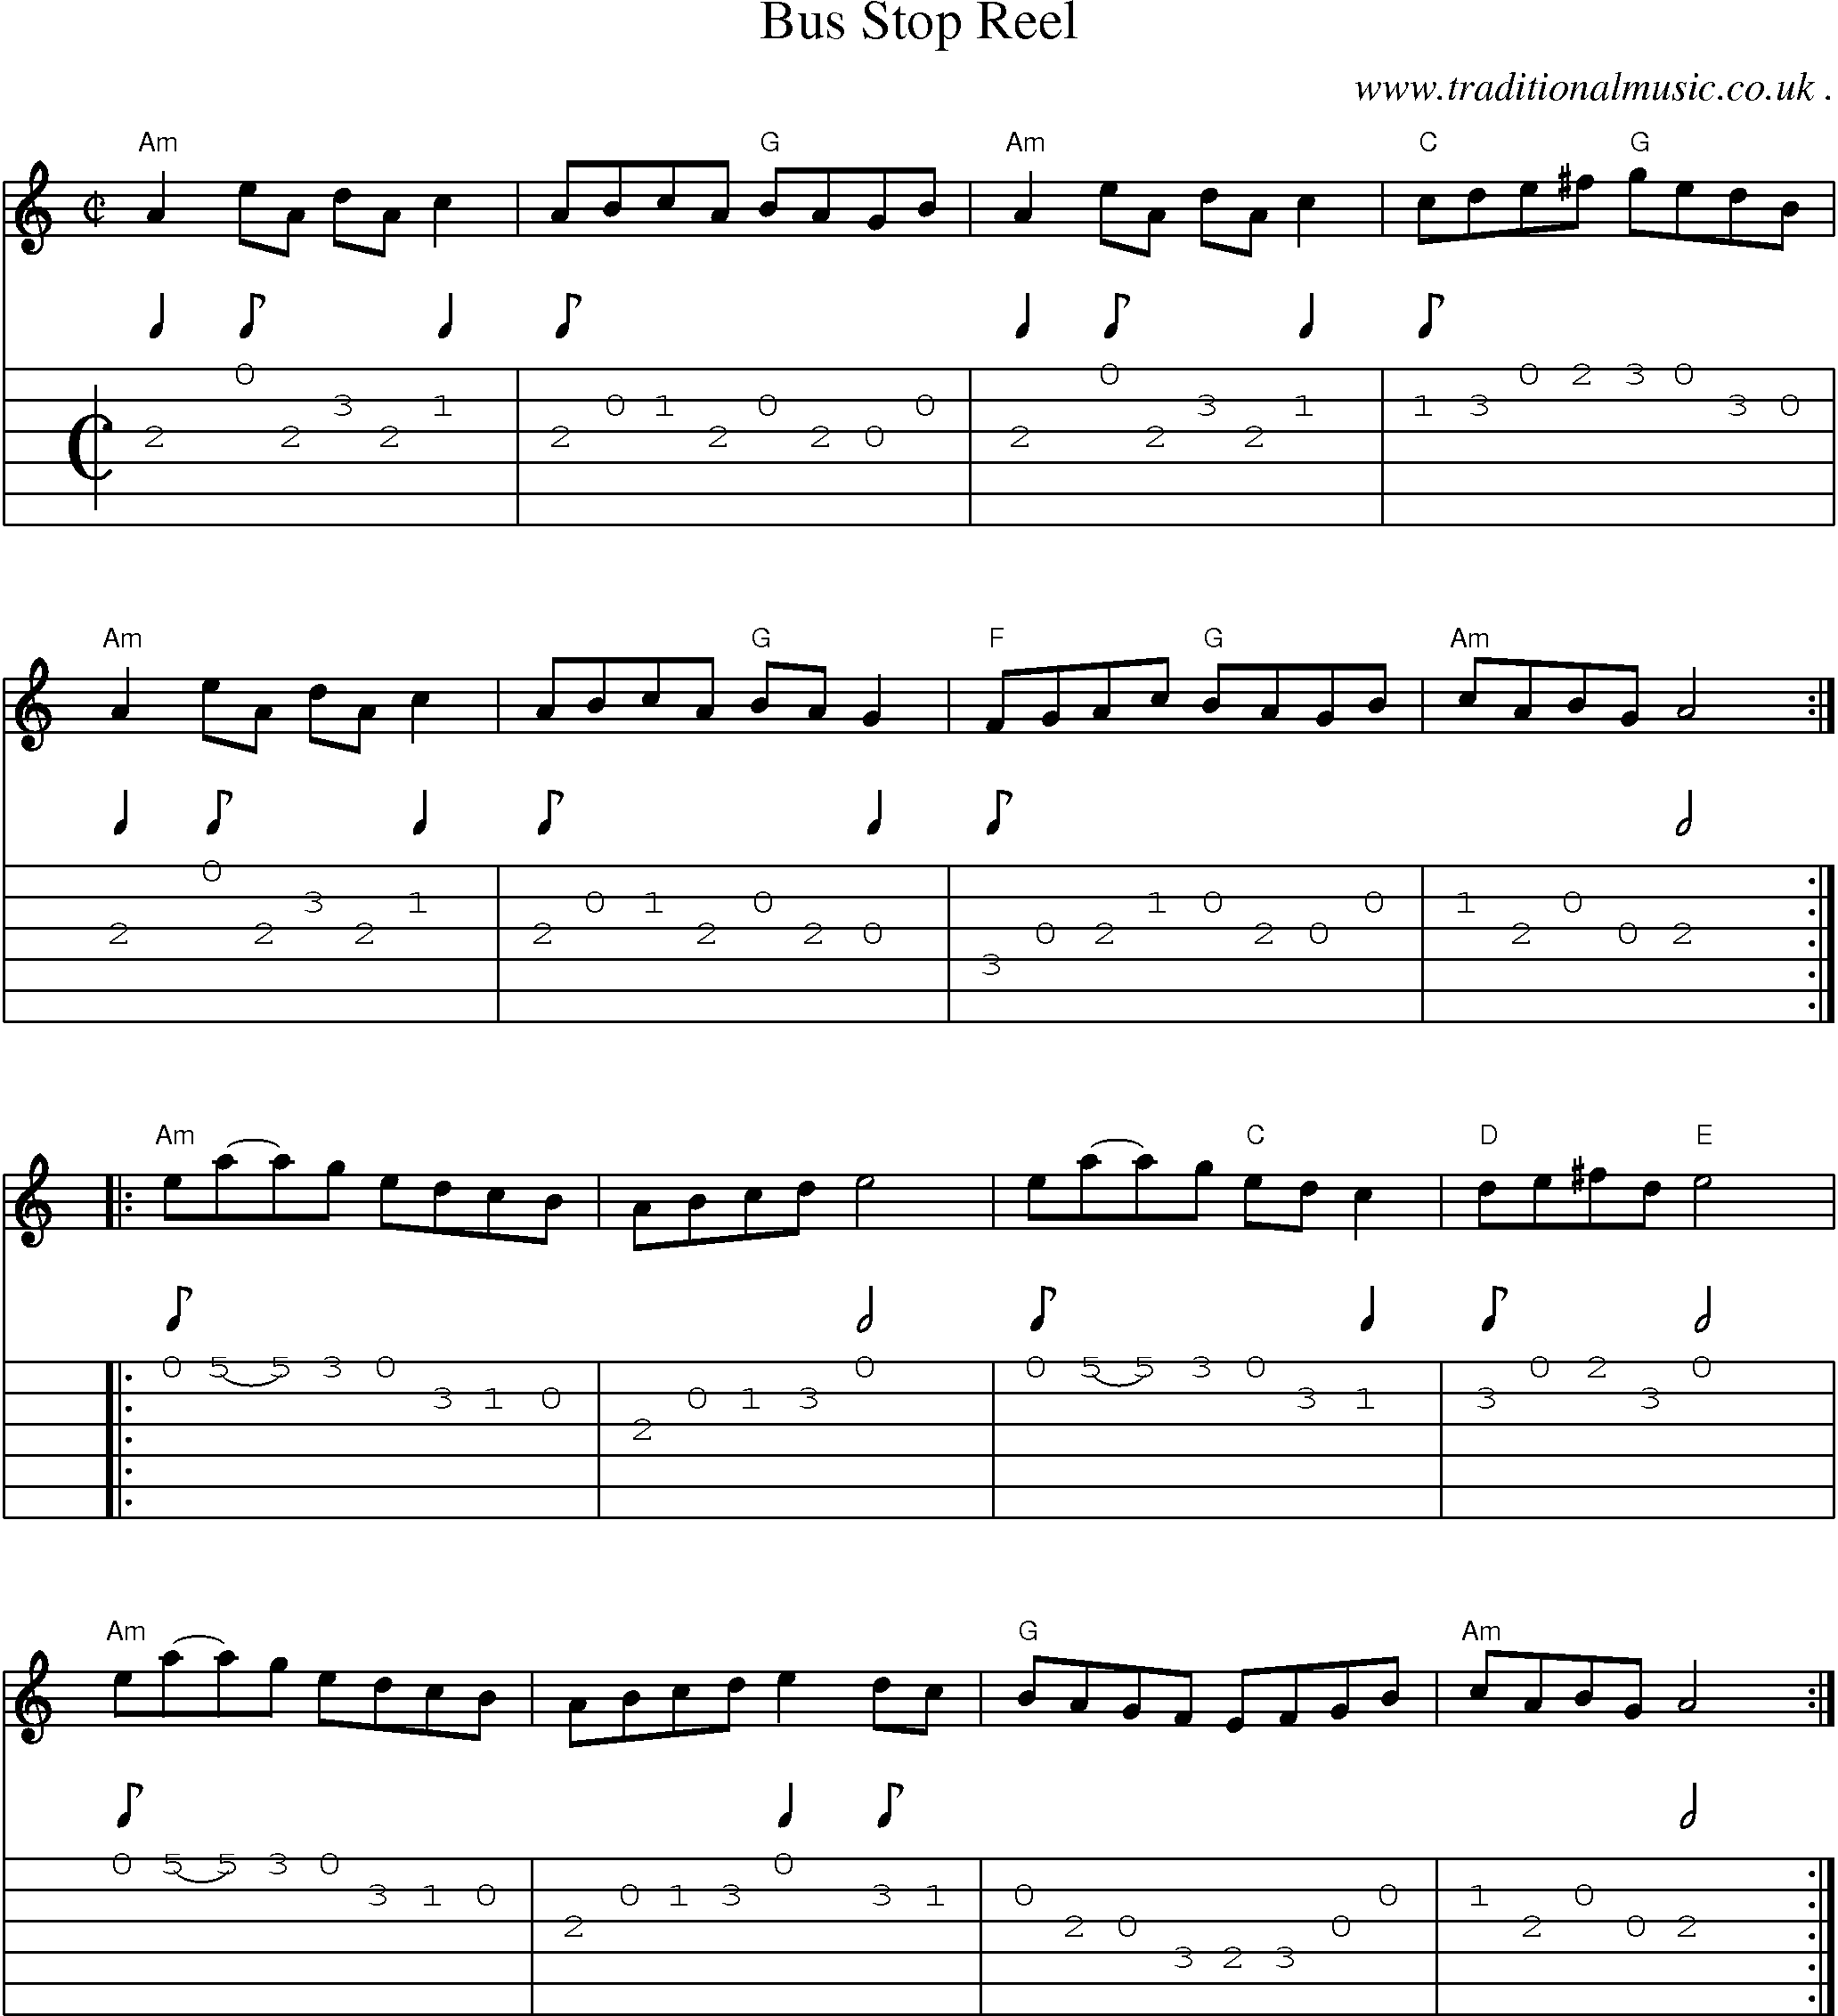 Music Score and Guitar Tabs for Bus Stop Reel